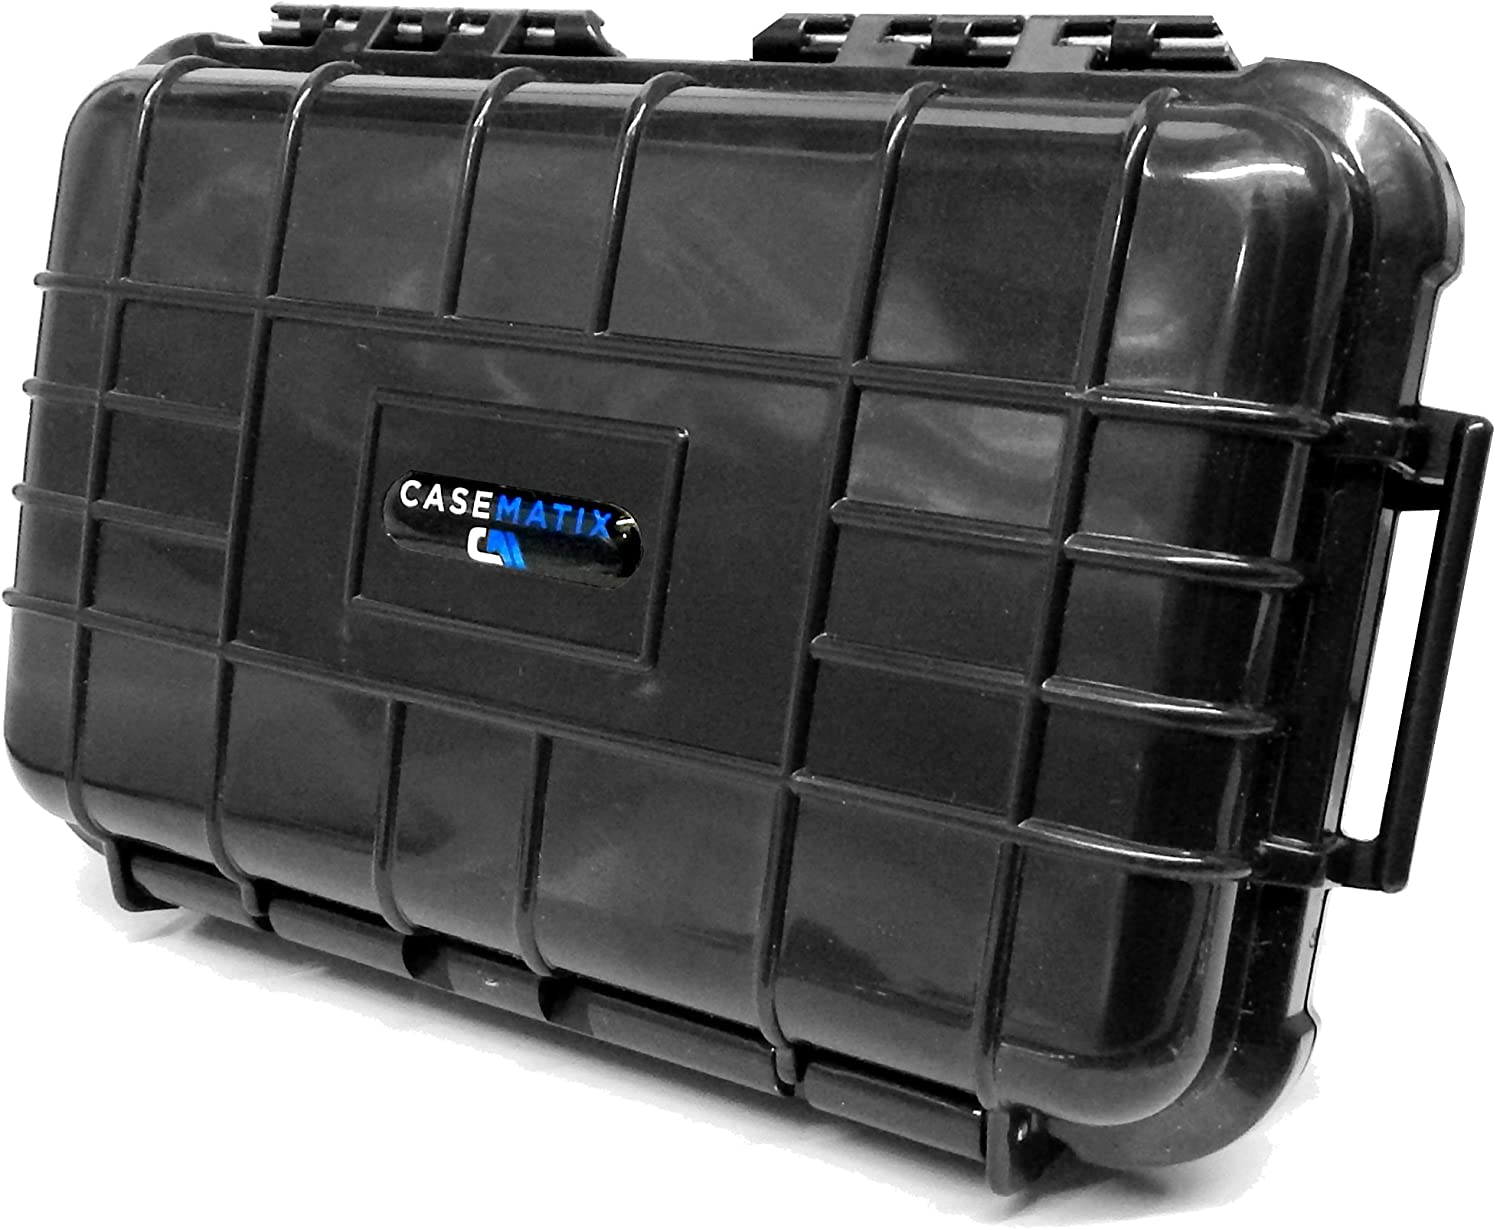  CASEMATIX Hard Shell 9mm Ammo Box for 5.56, 223 or 9mm Bullets  - 8 Waterproof Airtight 84 Slot Ammo Case with Custom Impact Absorbing  Ammo Can Foam, Compact Design Fits